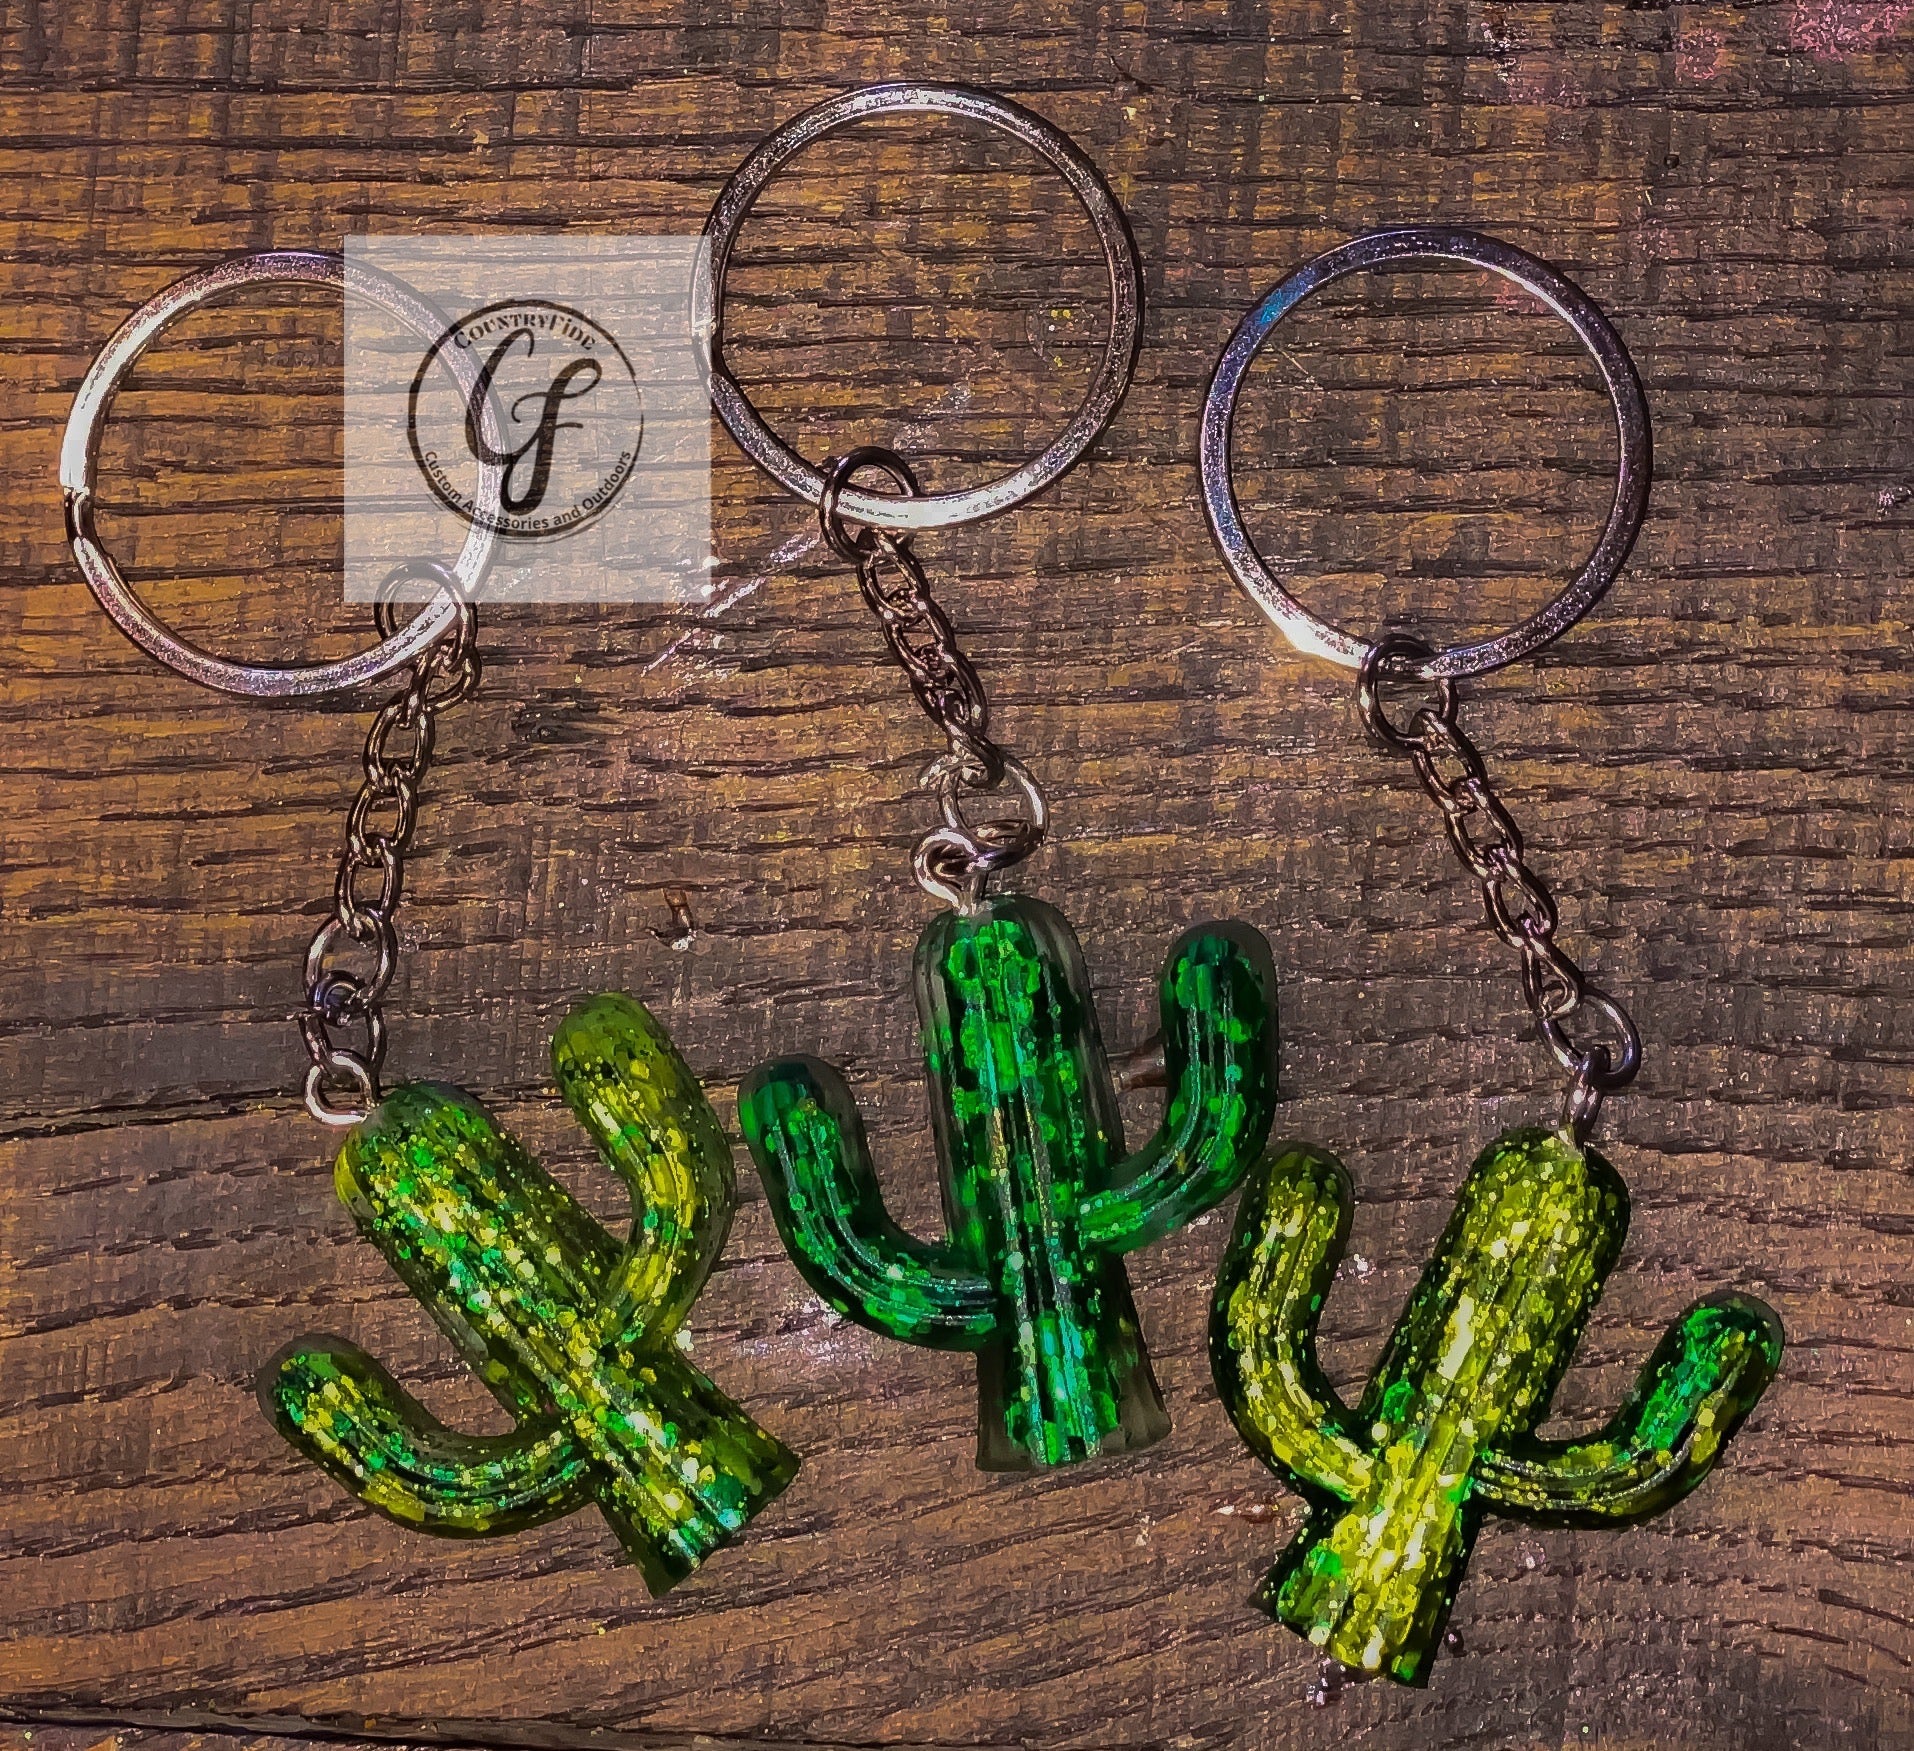 🌵 CACTUS KEYCHAINS 🌵 - CountryFide Custom Accessories and Outdoors